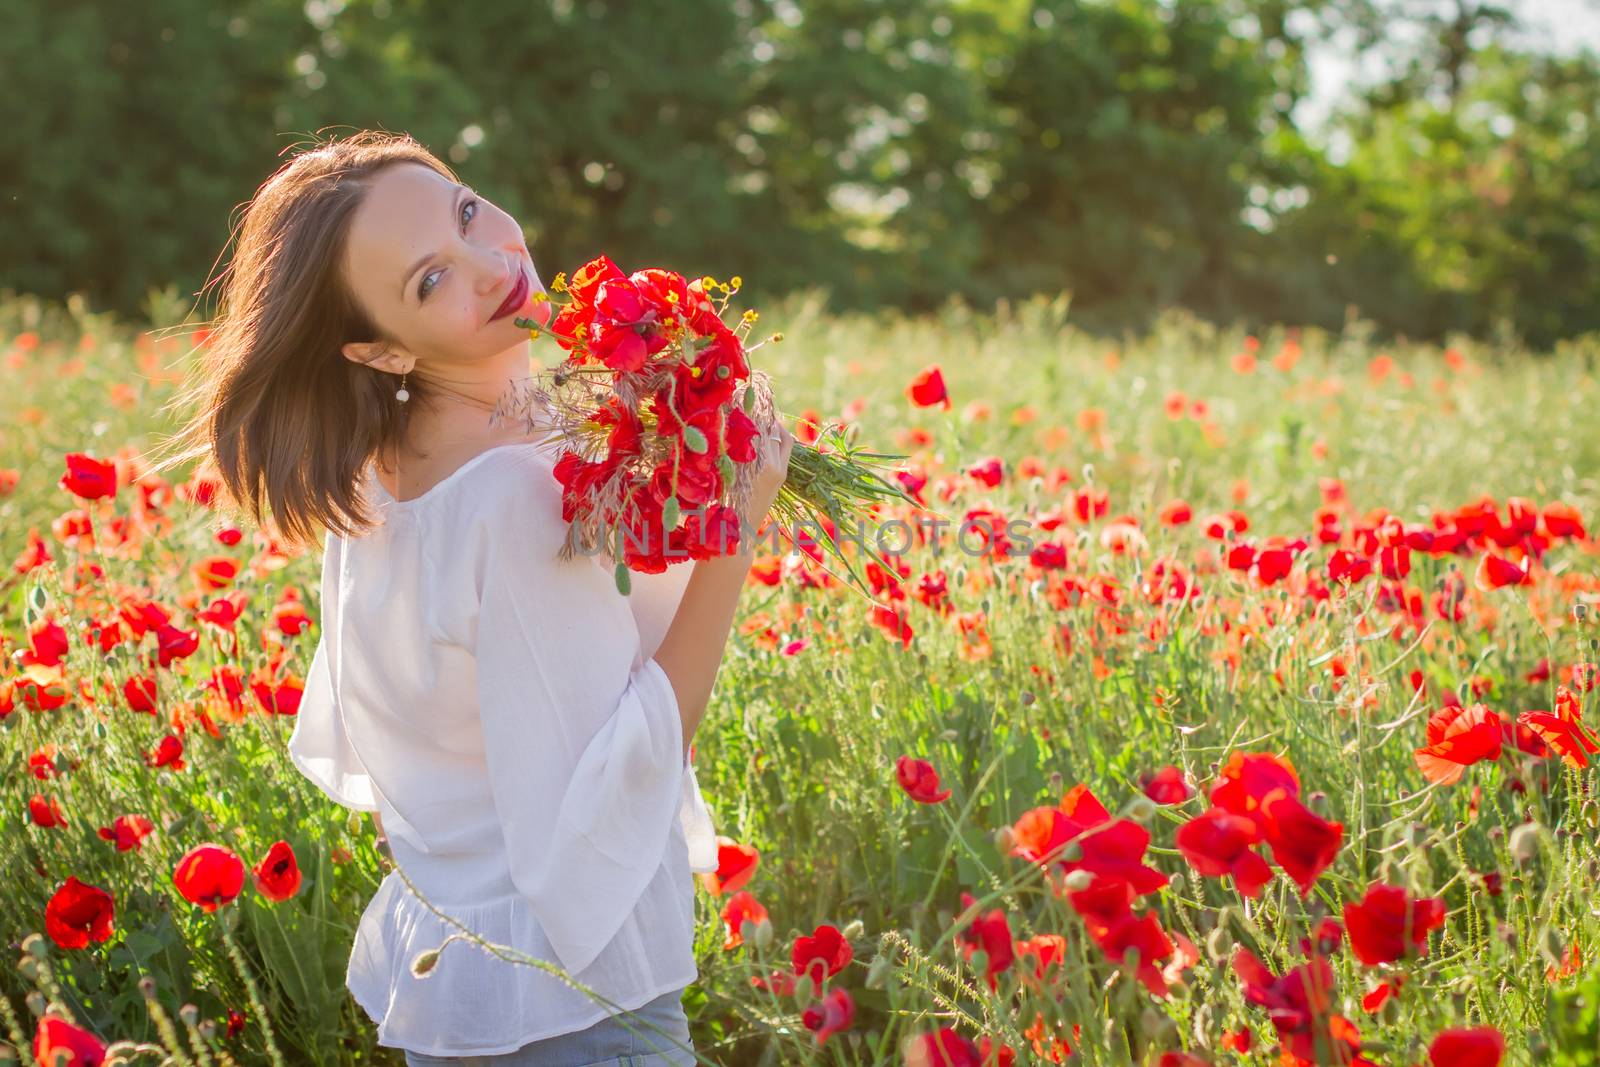 Woman with bouquet among poppies field at sunset by Angel_a